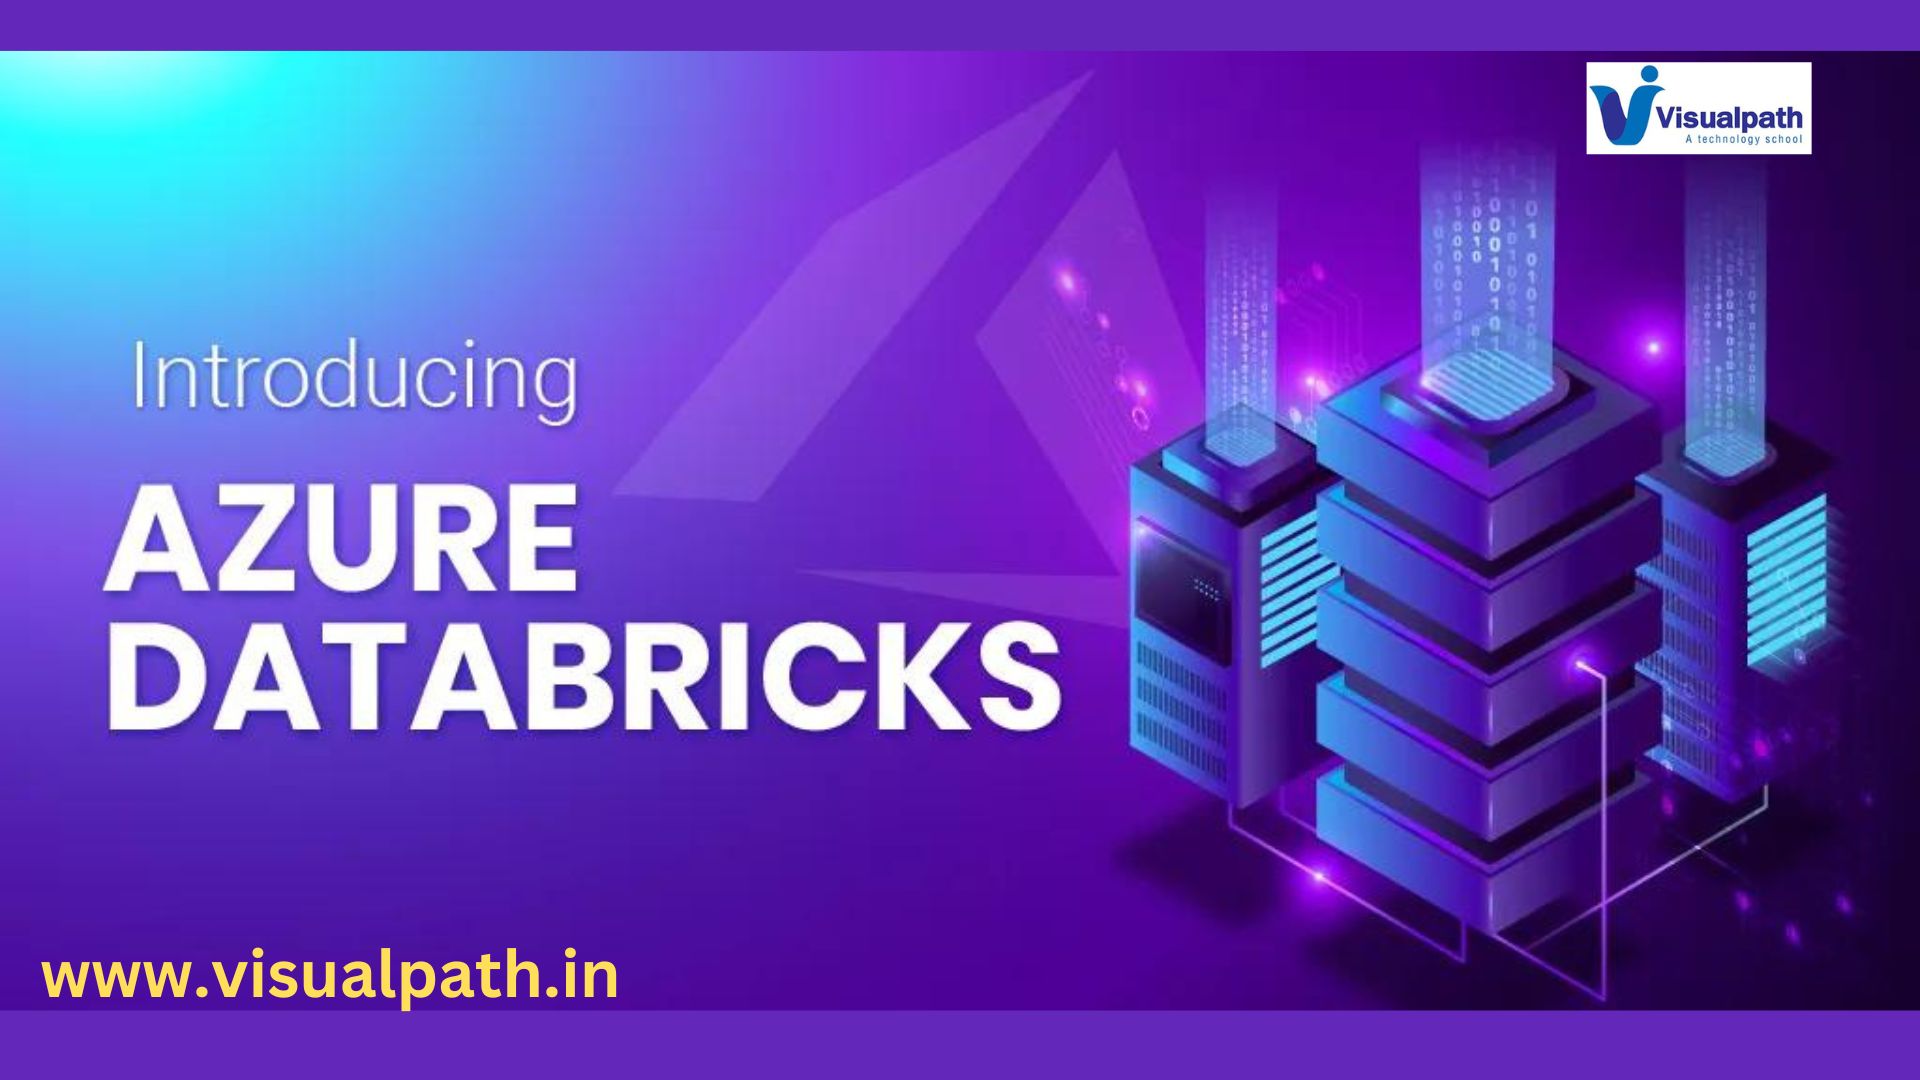 Azure Databricks Introduction? Benefits for data engineers and data scientists